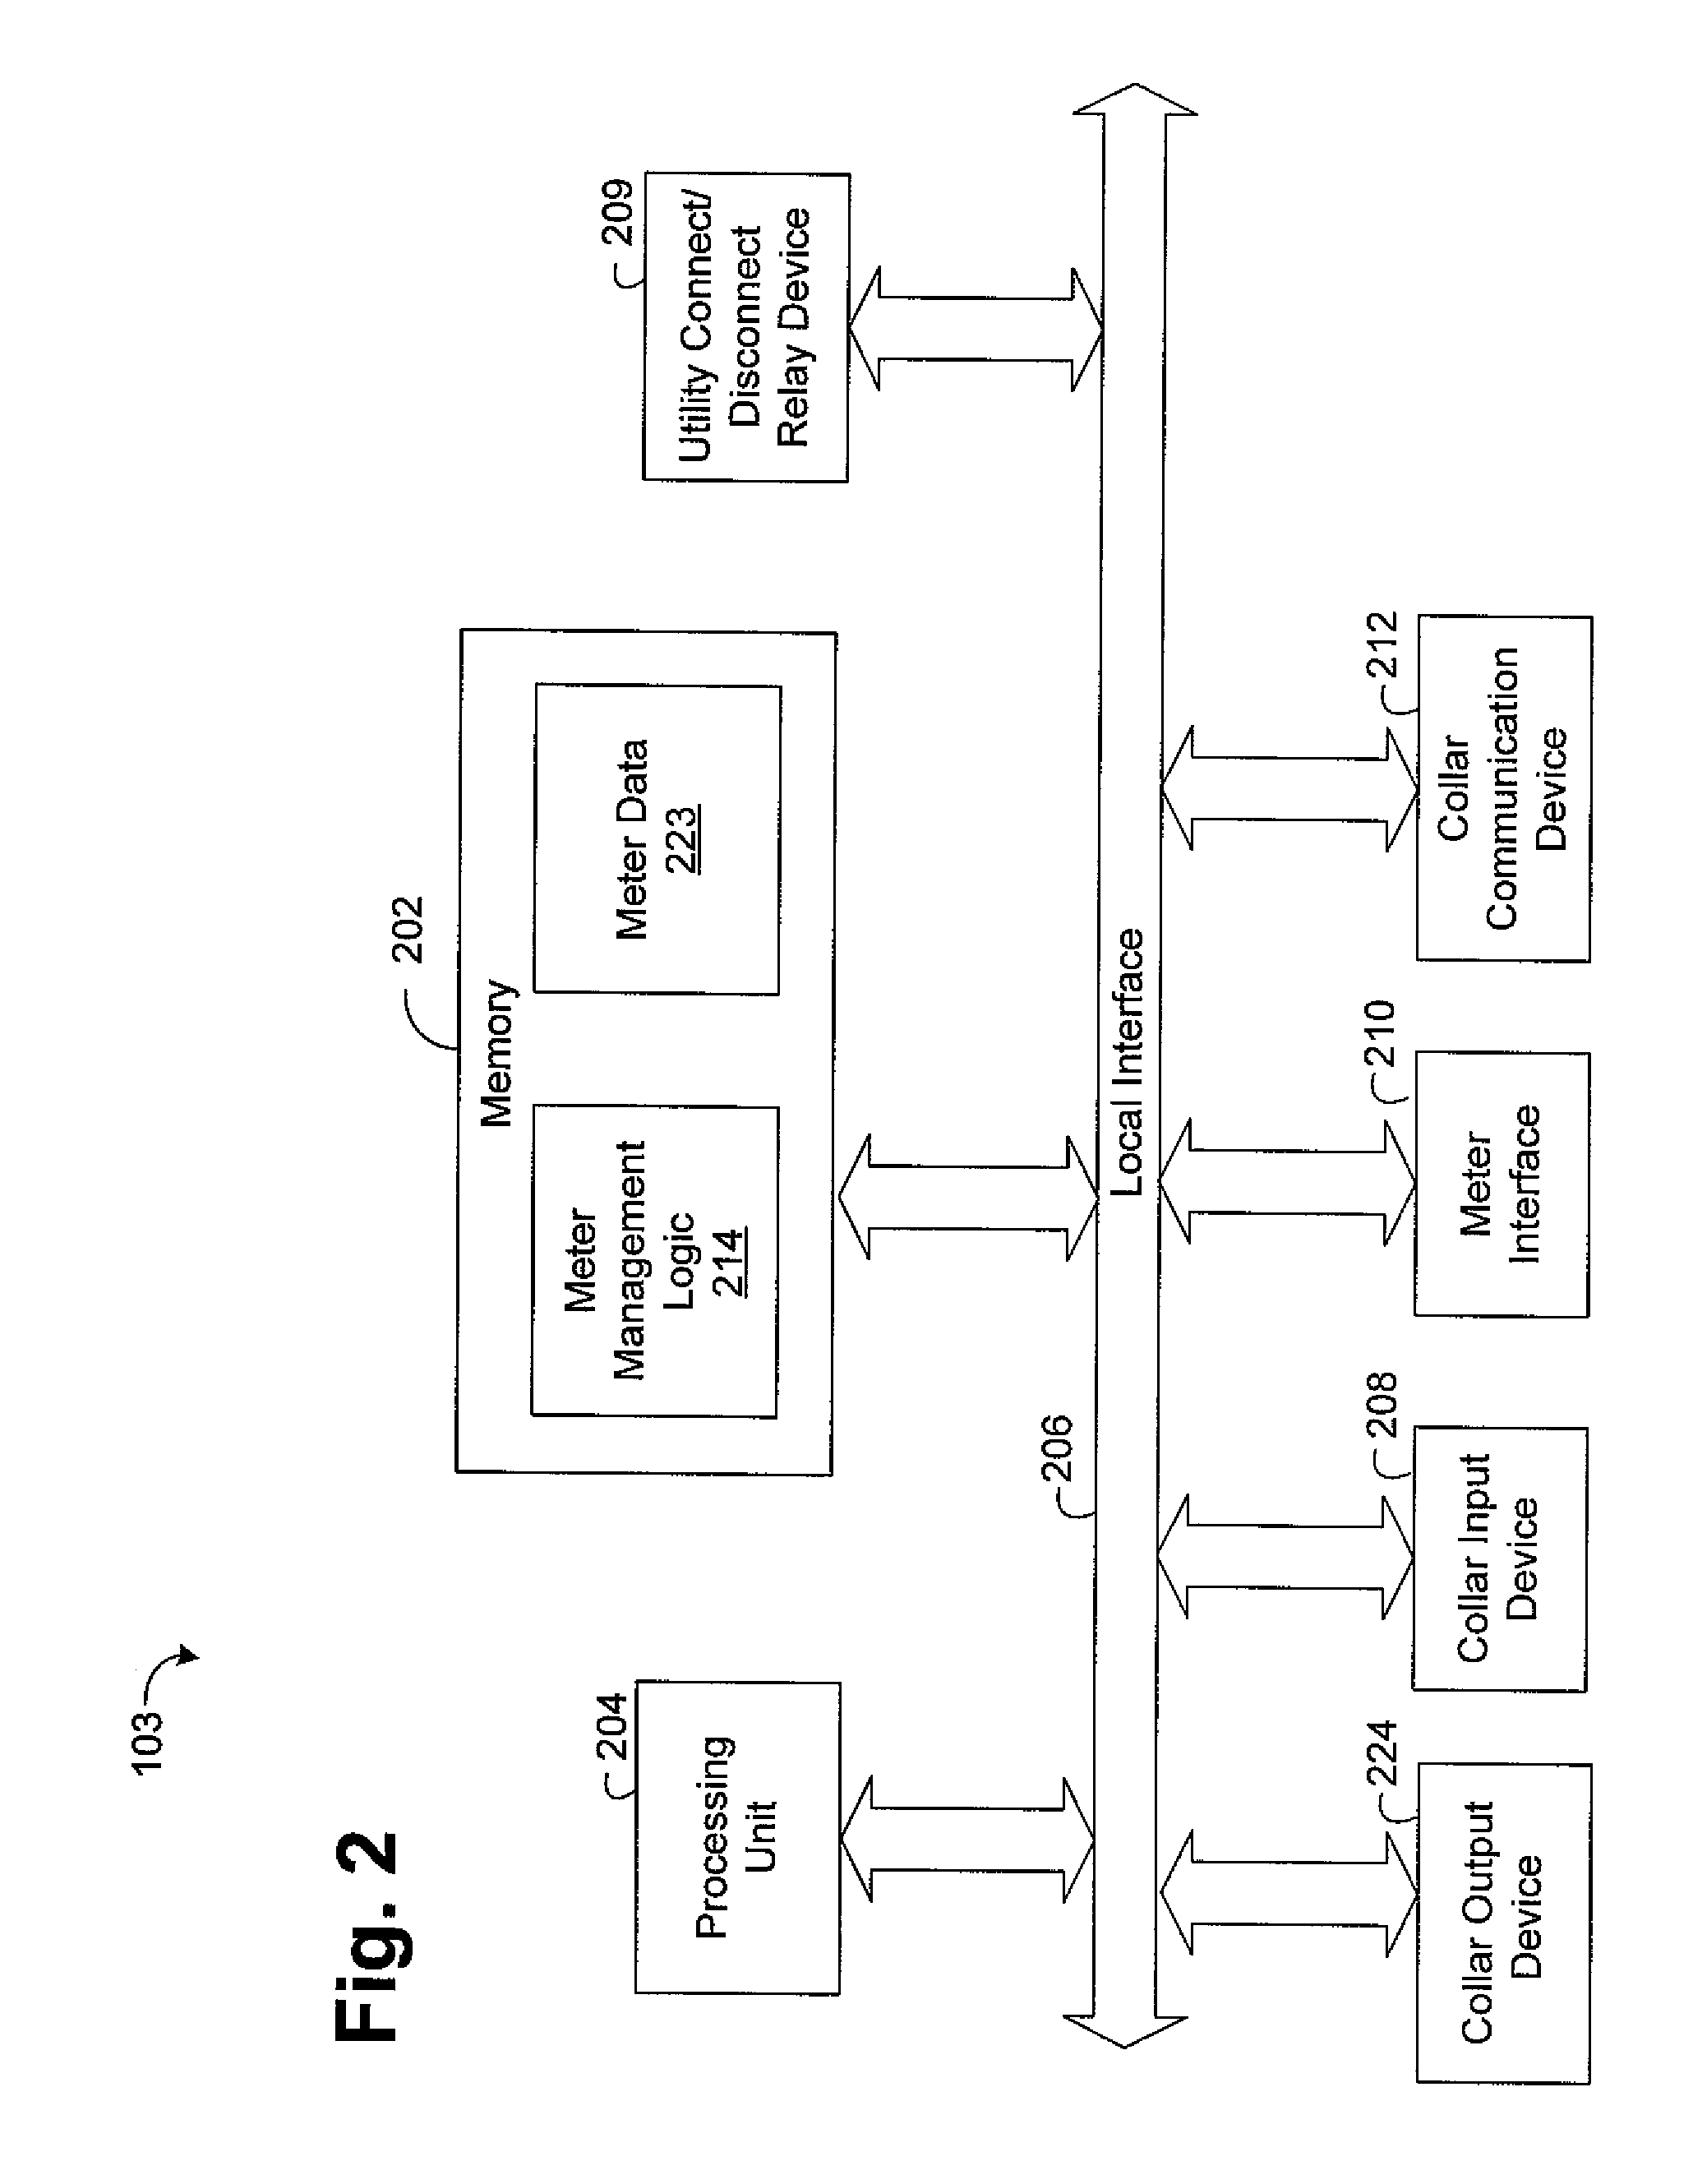 System and method for monitoring, controlling, and displaying utility information